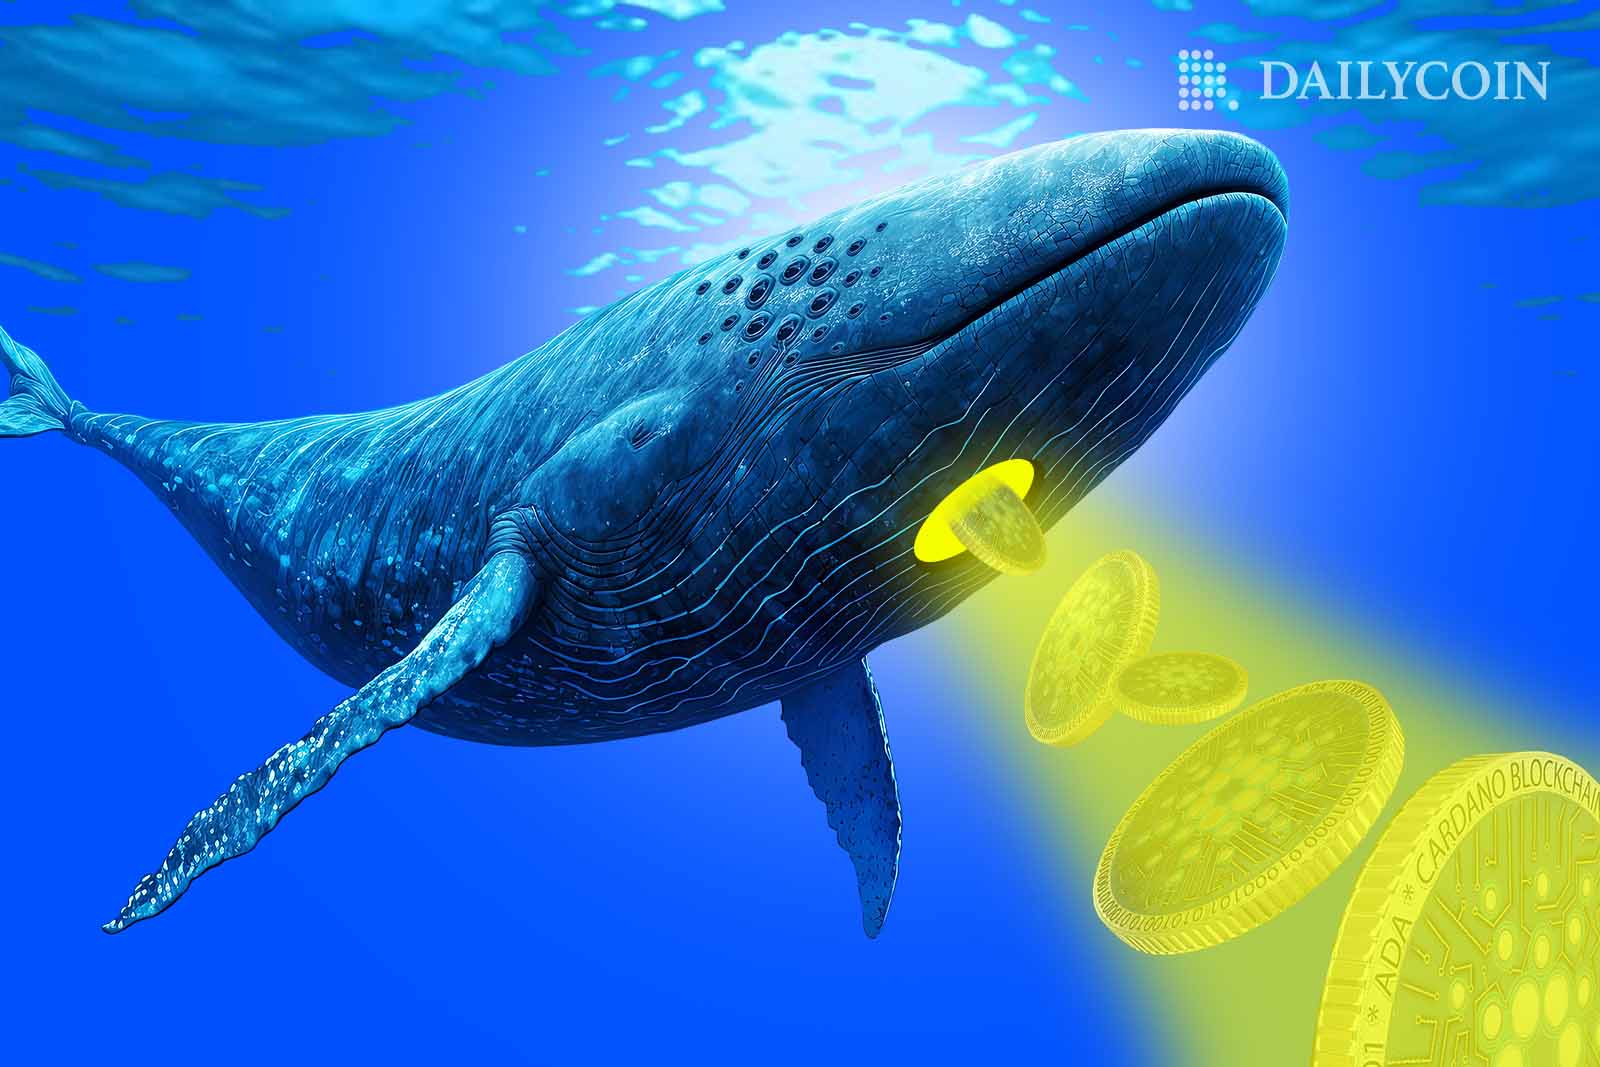 Cardano ada tokens coming out of whale's stomach.